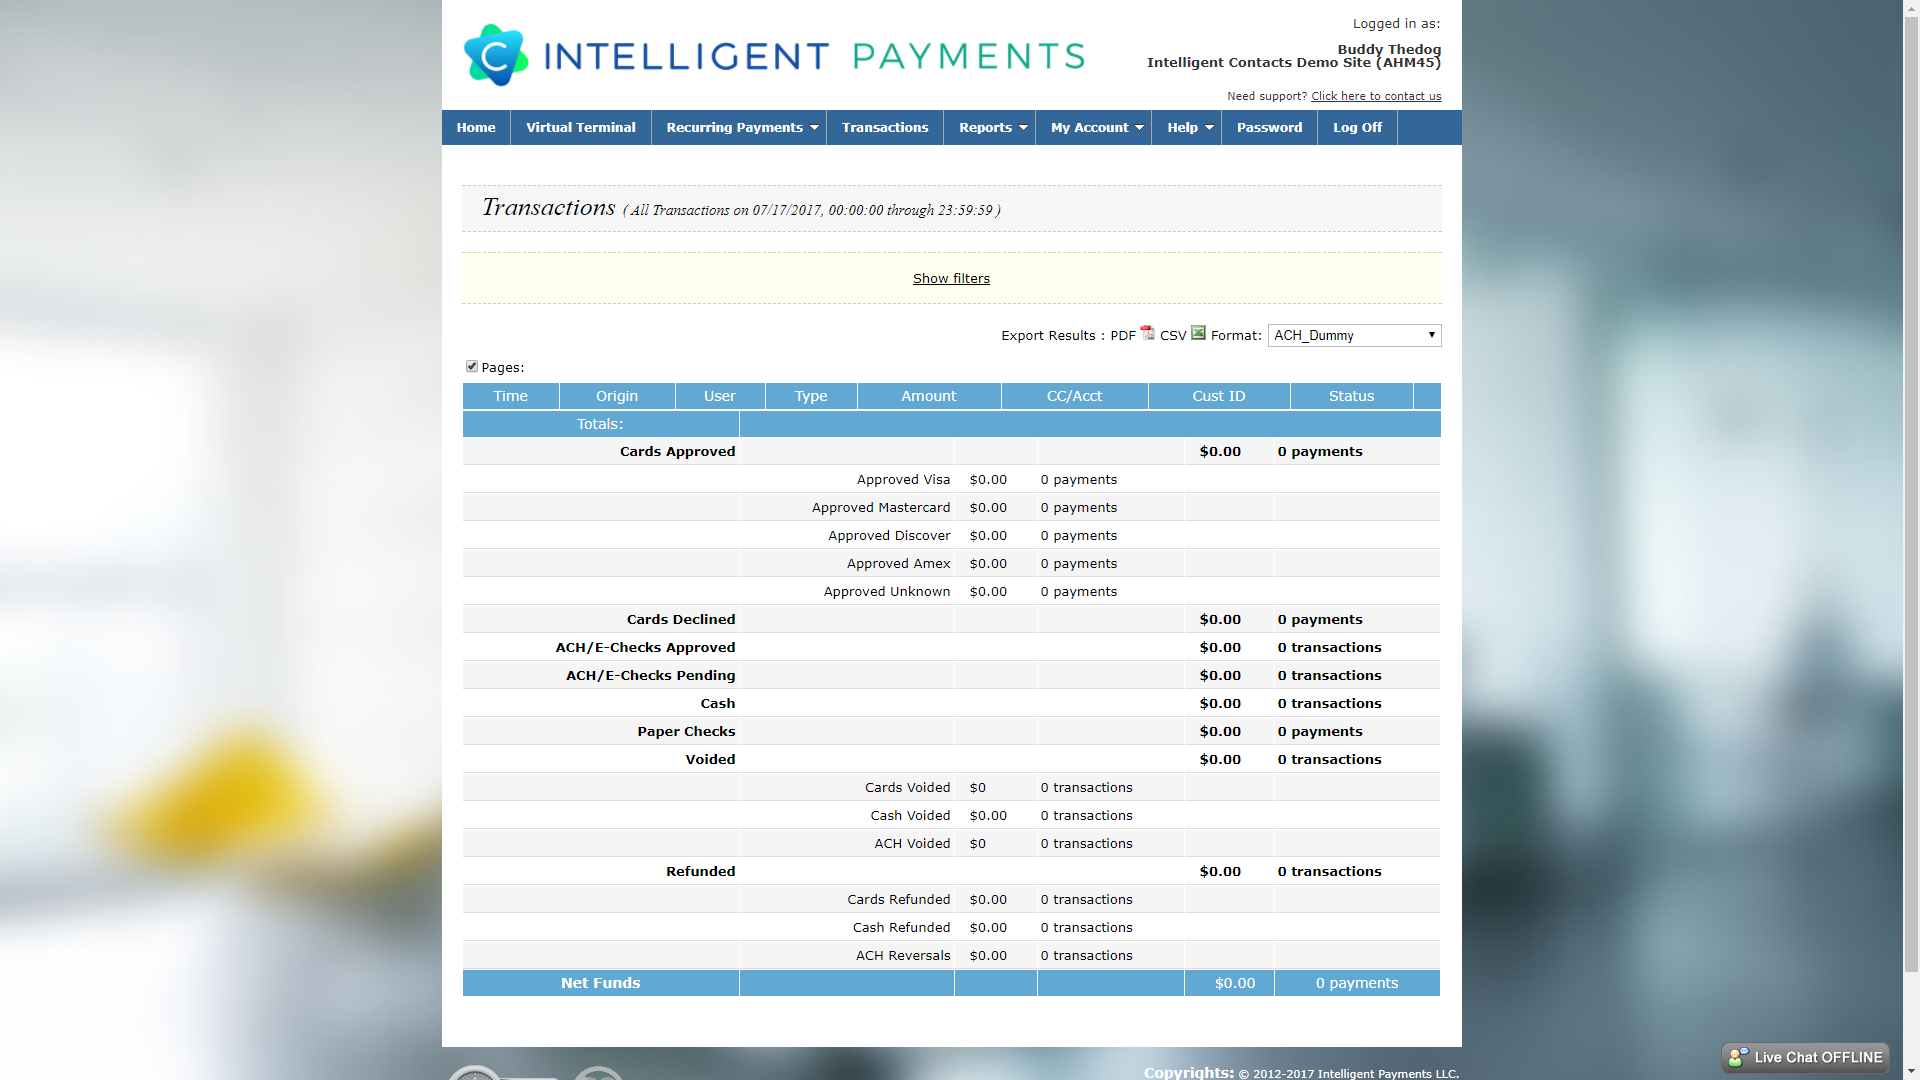 Intelligent Contacts puts a comprehensive payment processing and reporting system at your fingertips.